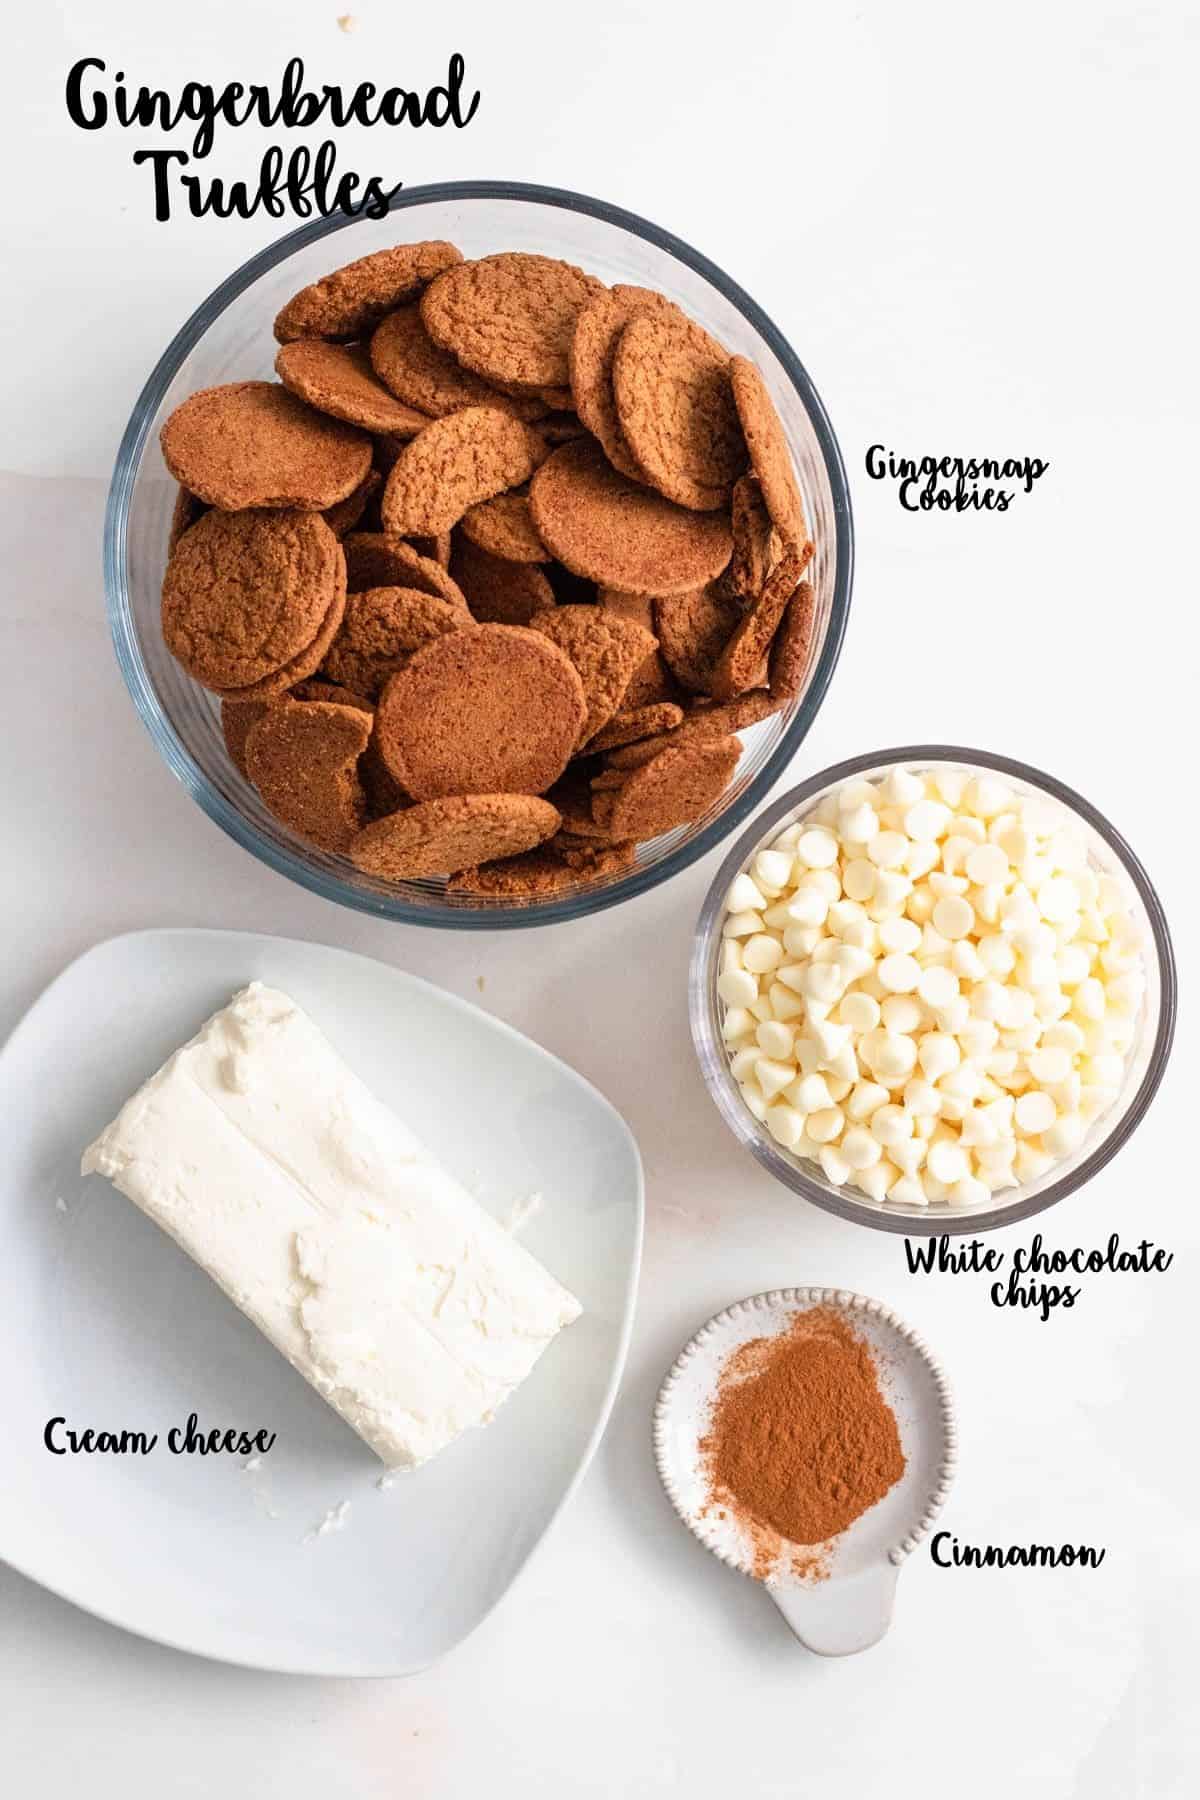 Ingredients shown are used to prepare gingerbread truffles. 